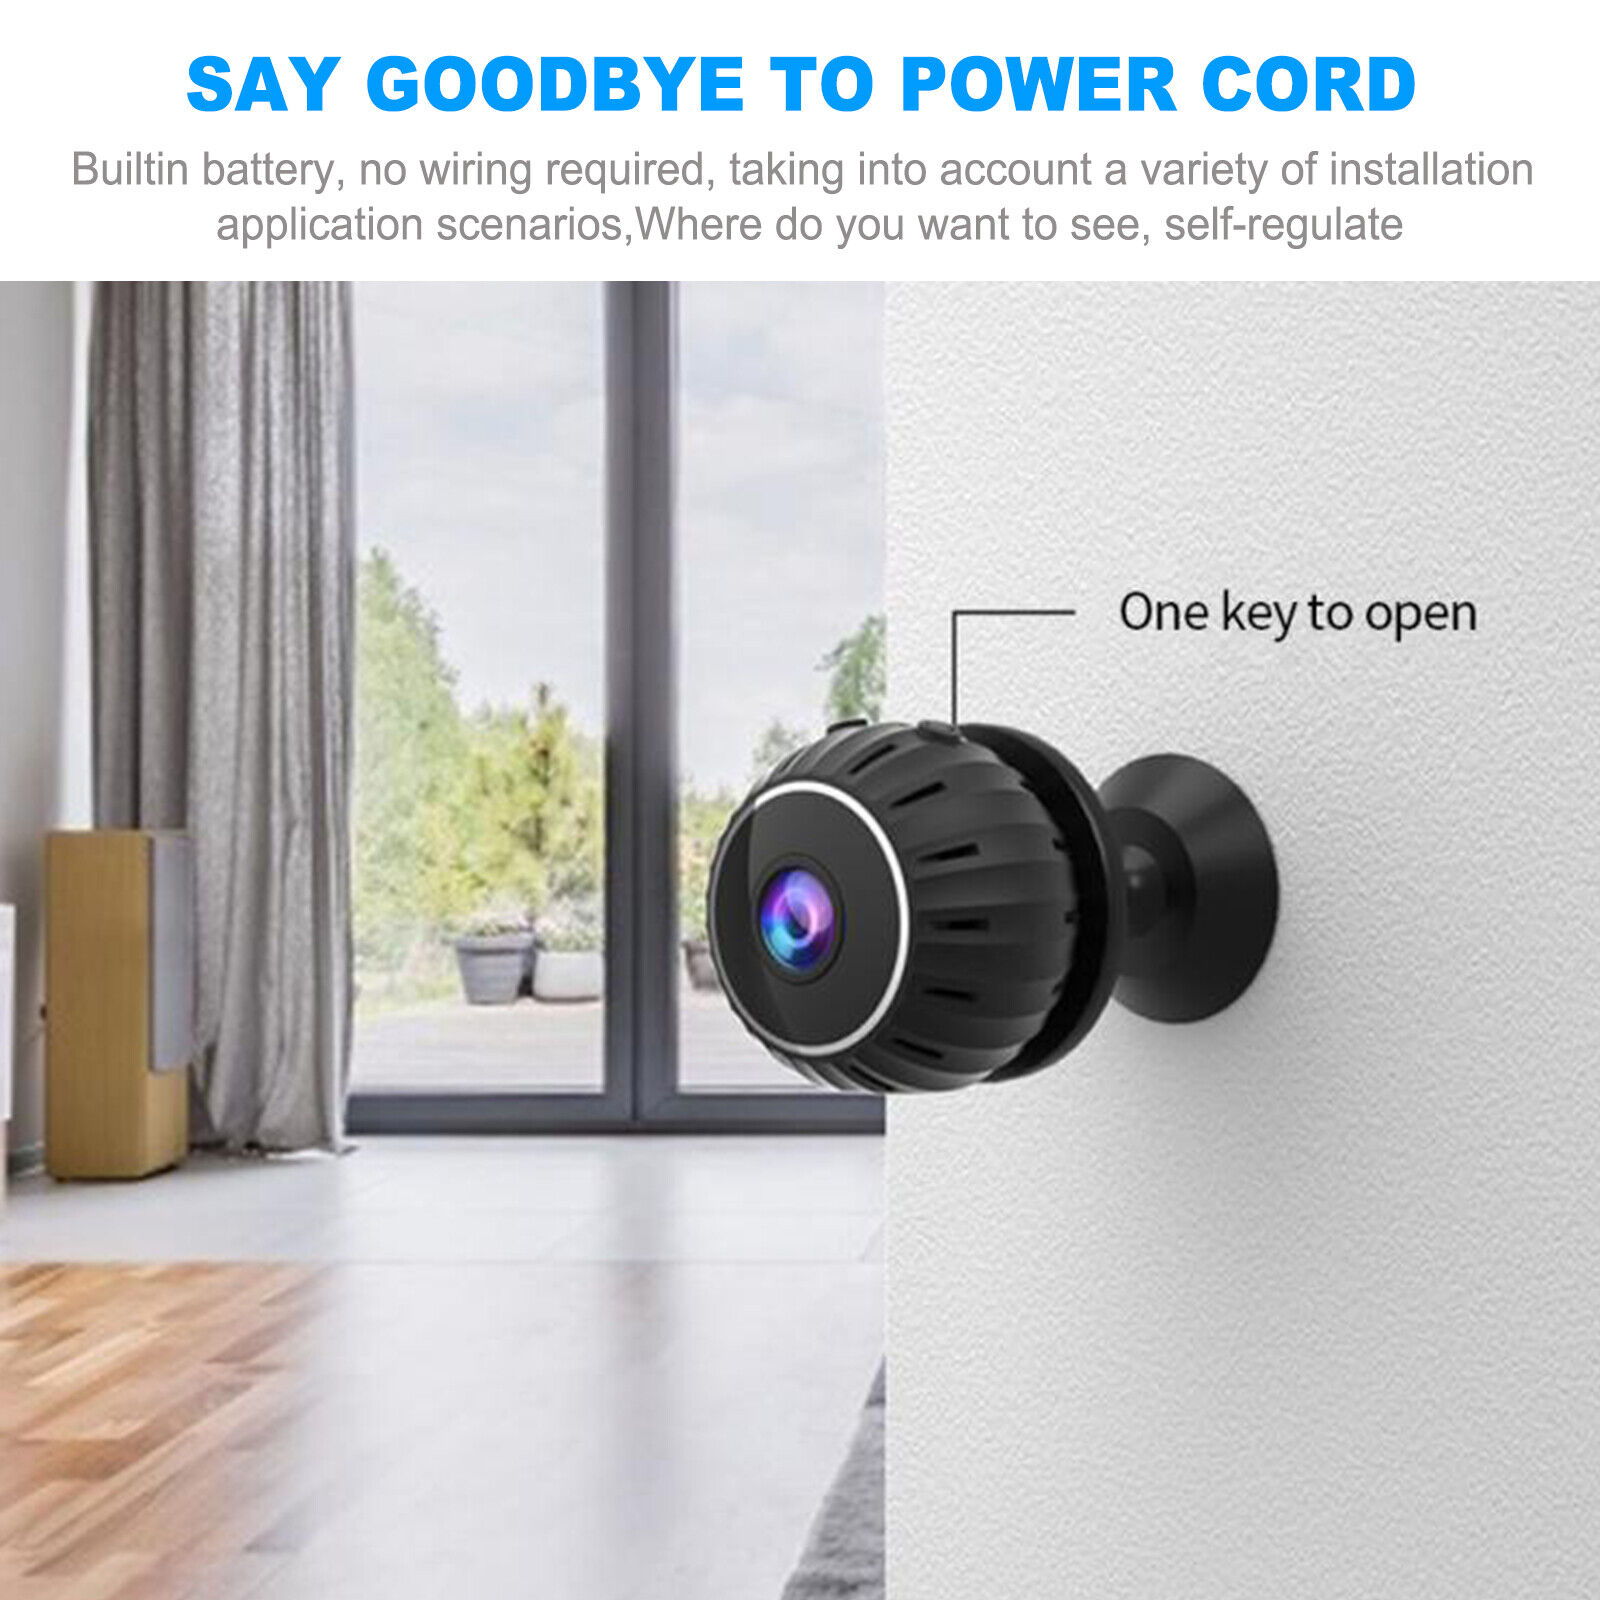 Security-Cameras-Mini-Camera-for-Home-Security-1080p-HD-Mini-IR-Camera-WiFi-Wireless-Small-Indoor-Nanny-Camera-Cell-Phone-APP-Control-with-A-Wide-Angle-Remote-View-20